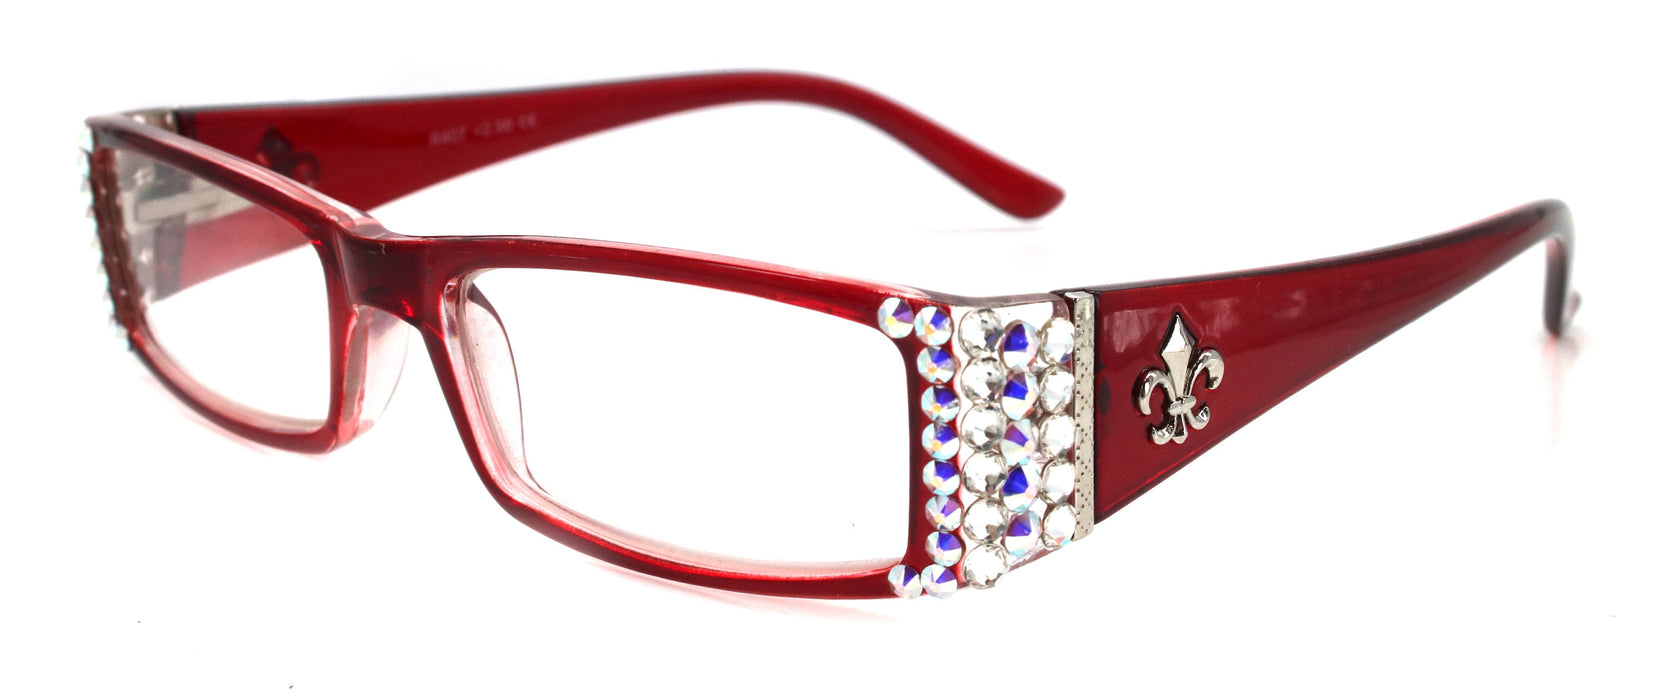 The French, (Bling) (Fleur De Lis) Women Reading Glasses W Genuine European Crystals (Aurora Borealis, Clear) (Red) Frame, NY Fifth Avenue